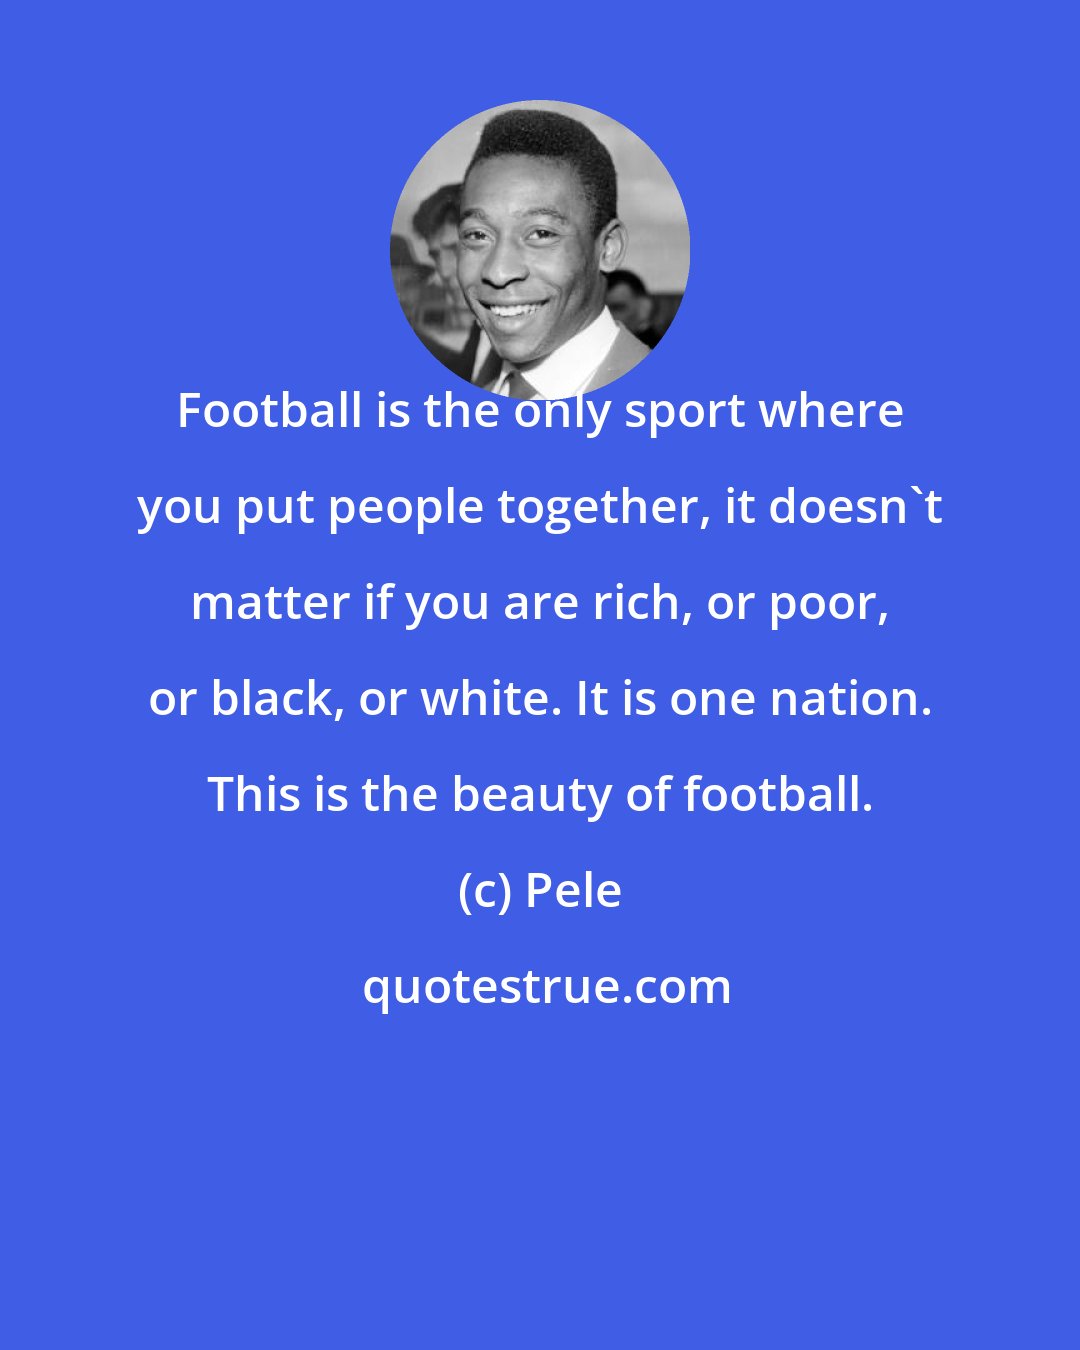 Pele: Football is the only sport where you put people together, it doesn't matter if you are rich, or poor, or black, or white. It is one nation. This is the beauty of football.